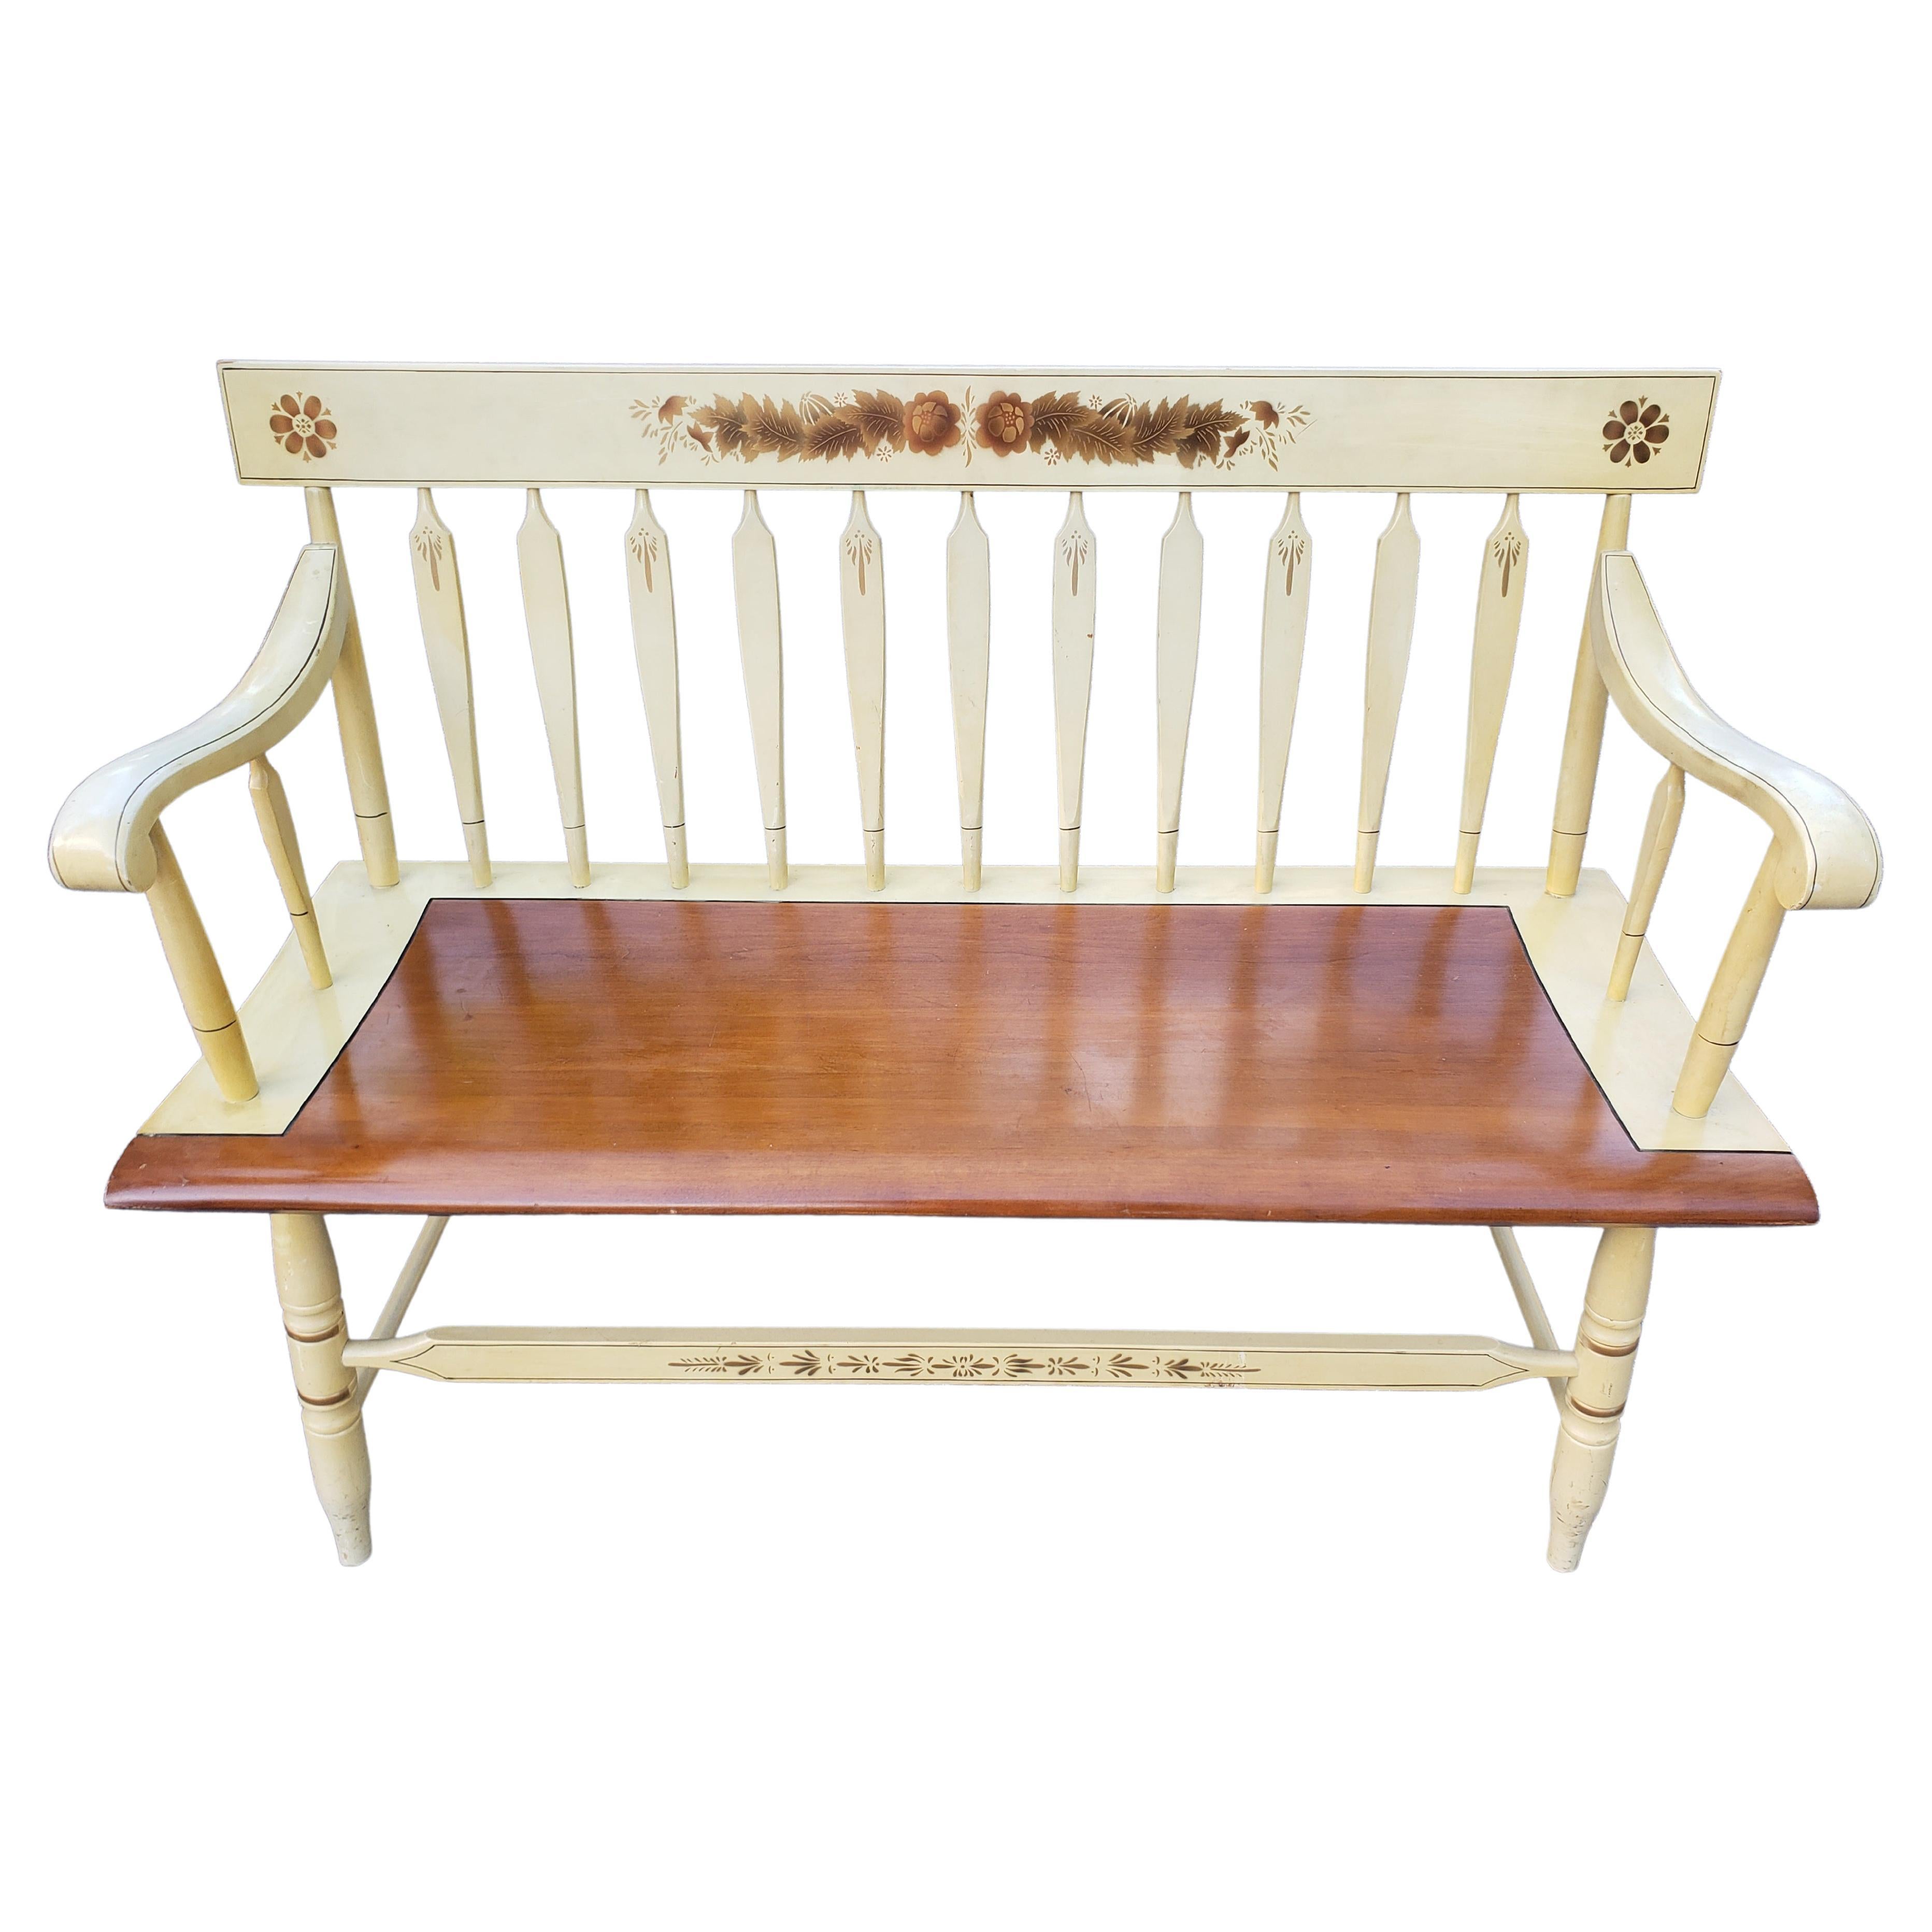 Hitchcock Painted and Decorated Maple Two-Seater Bench Settee